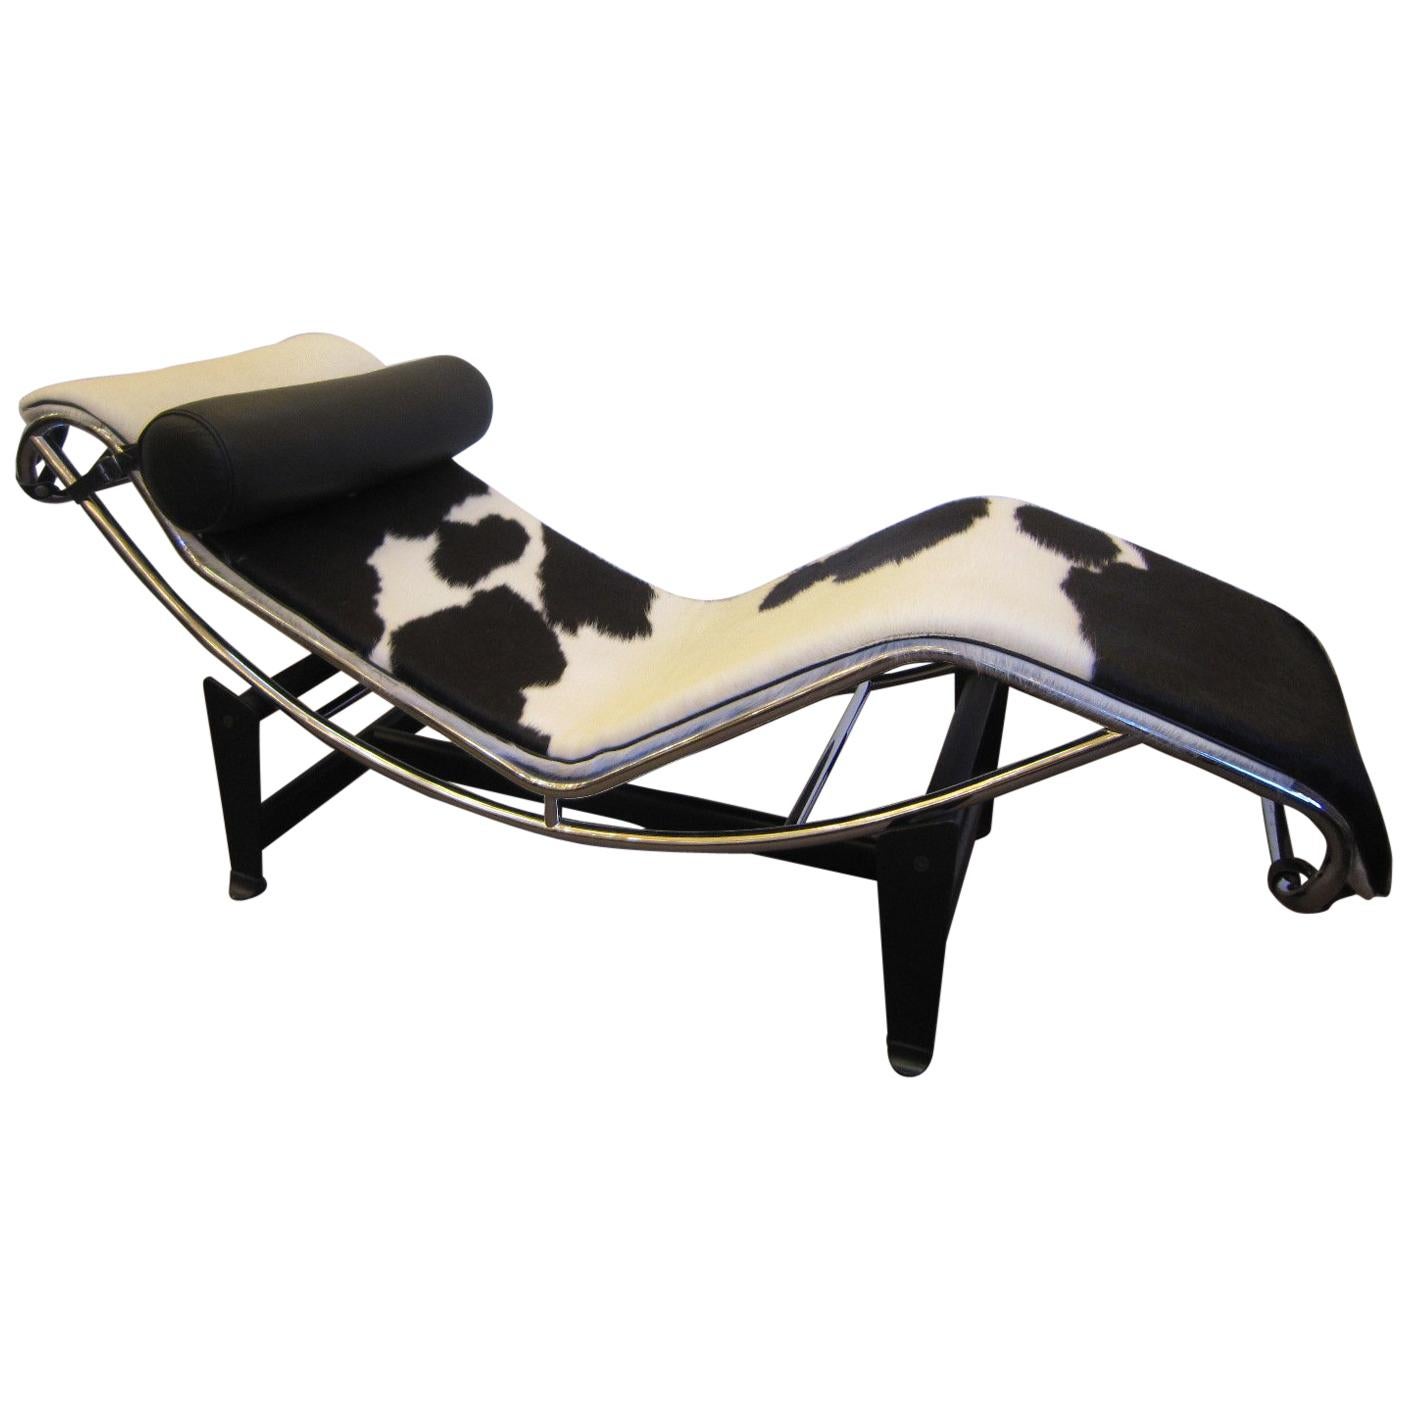 Chaise Lounge Chair Black & White Cowhide with Black Leather Pillow Le Corbusier